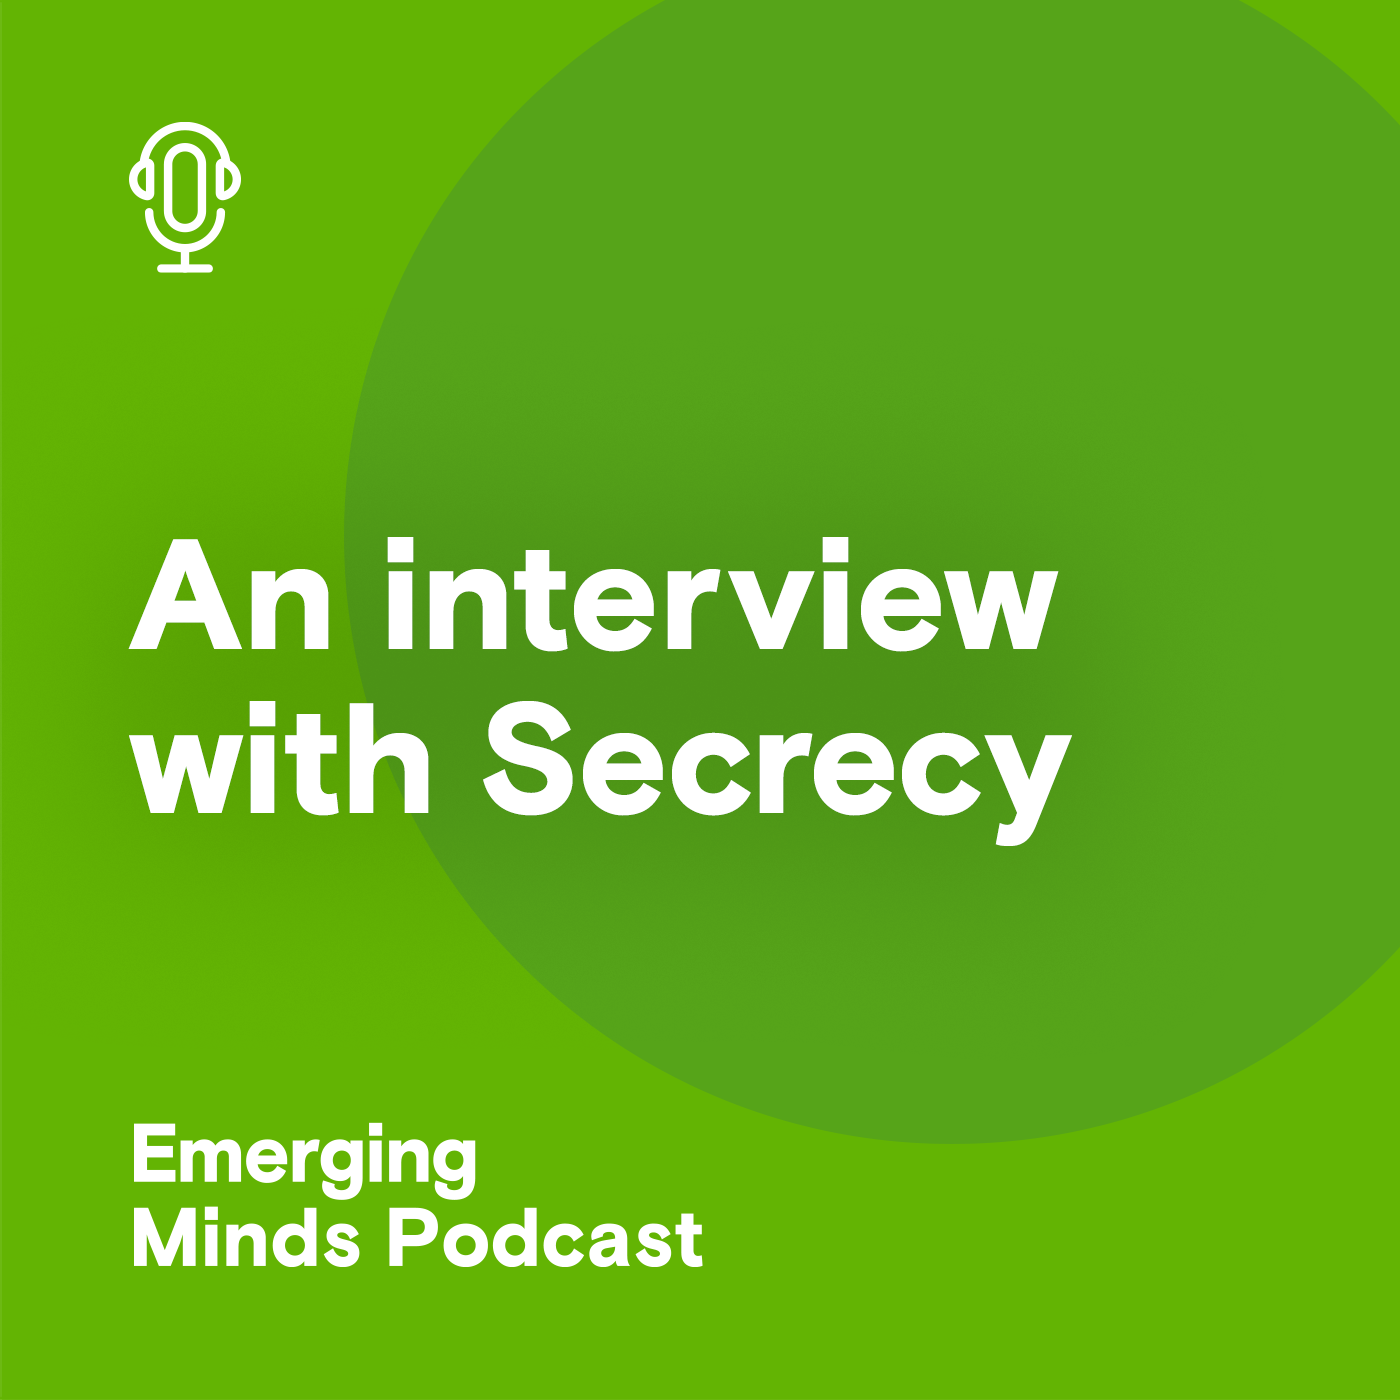 An interview with Secrecy